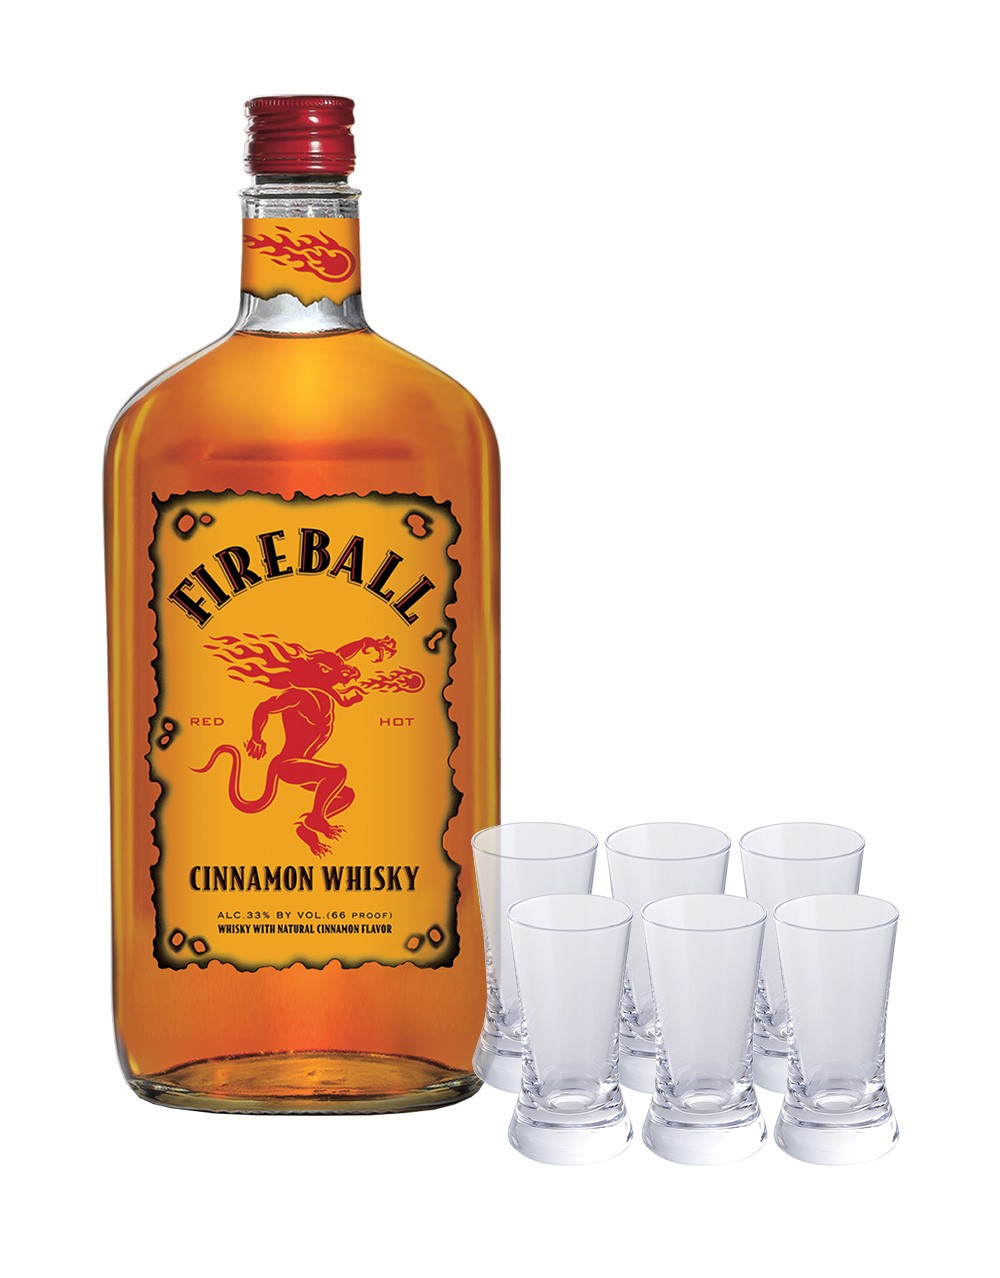 Fireball Whisky with Shot Glasses | Buy Online or Send as a Gift ...